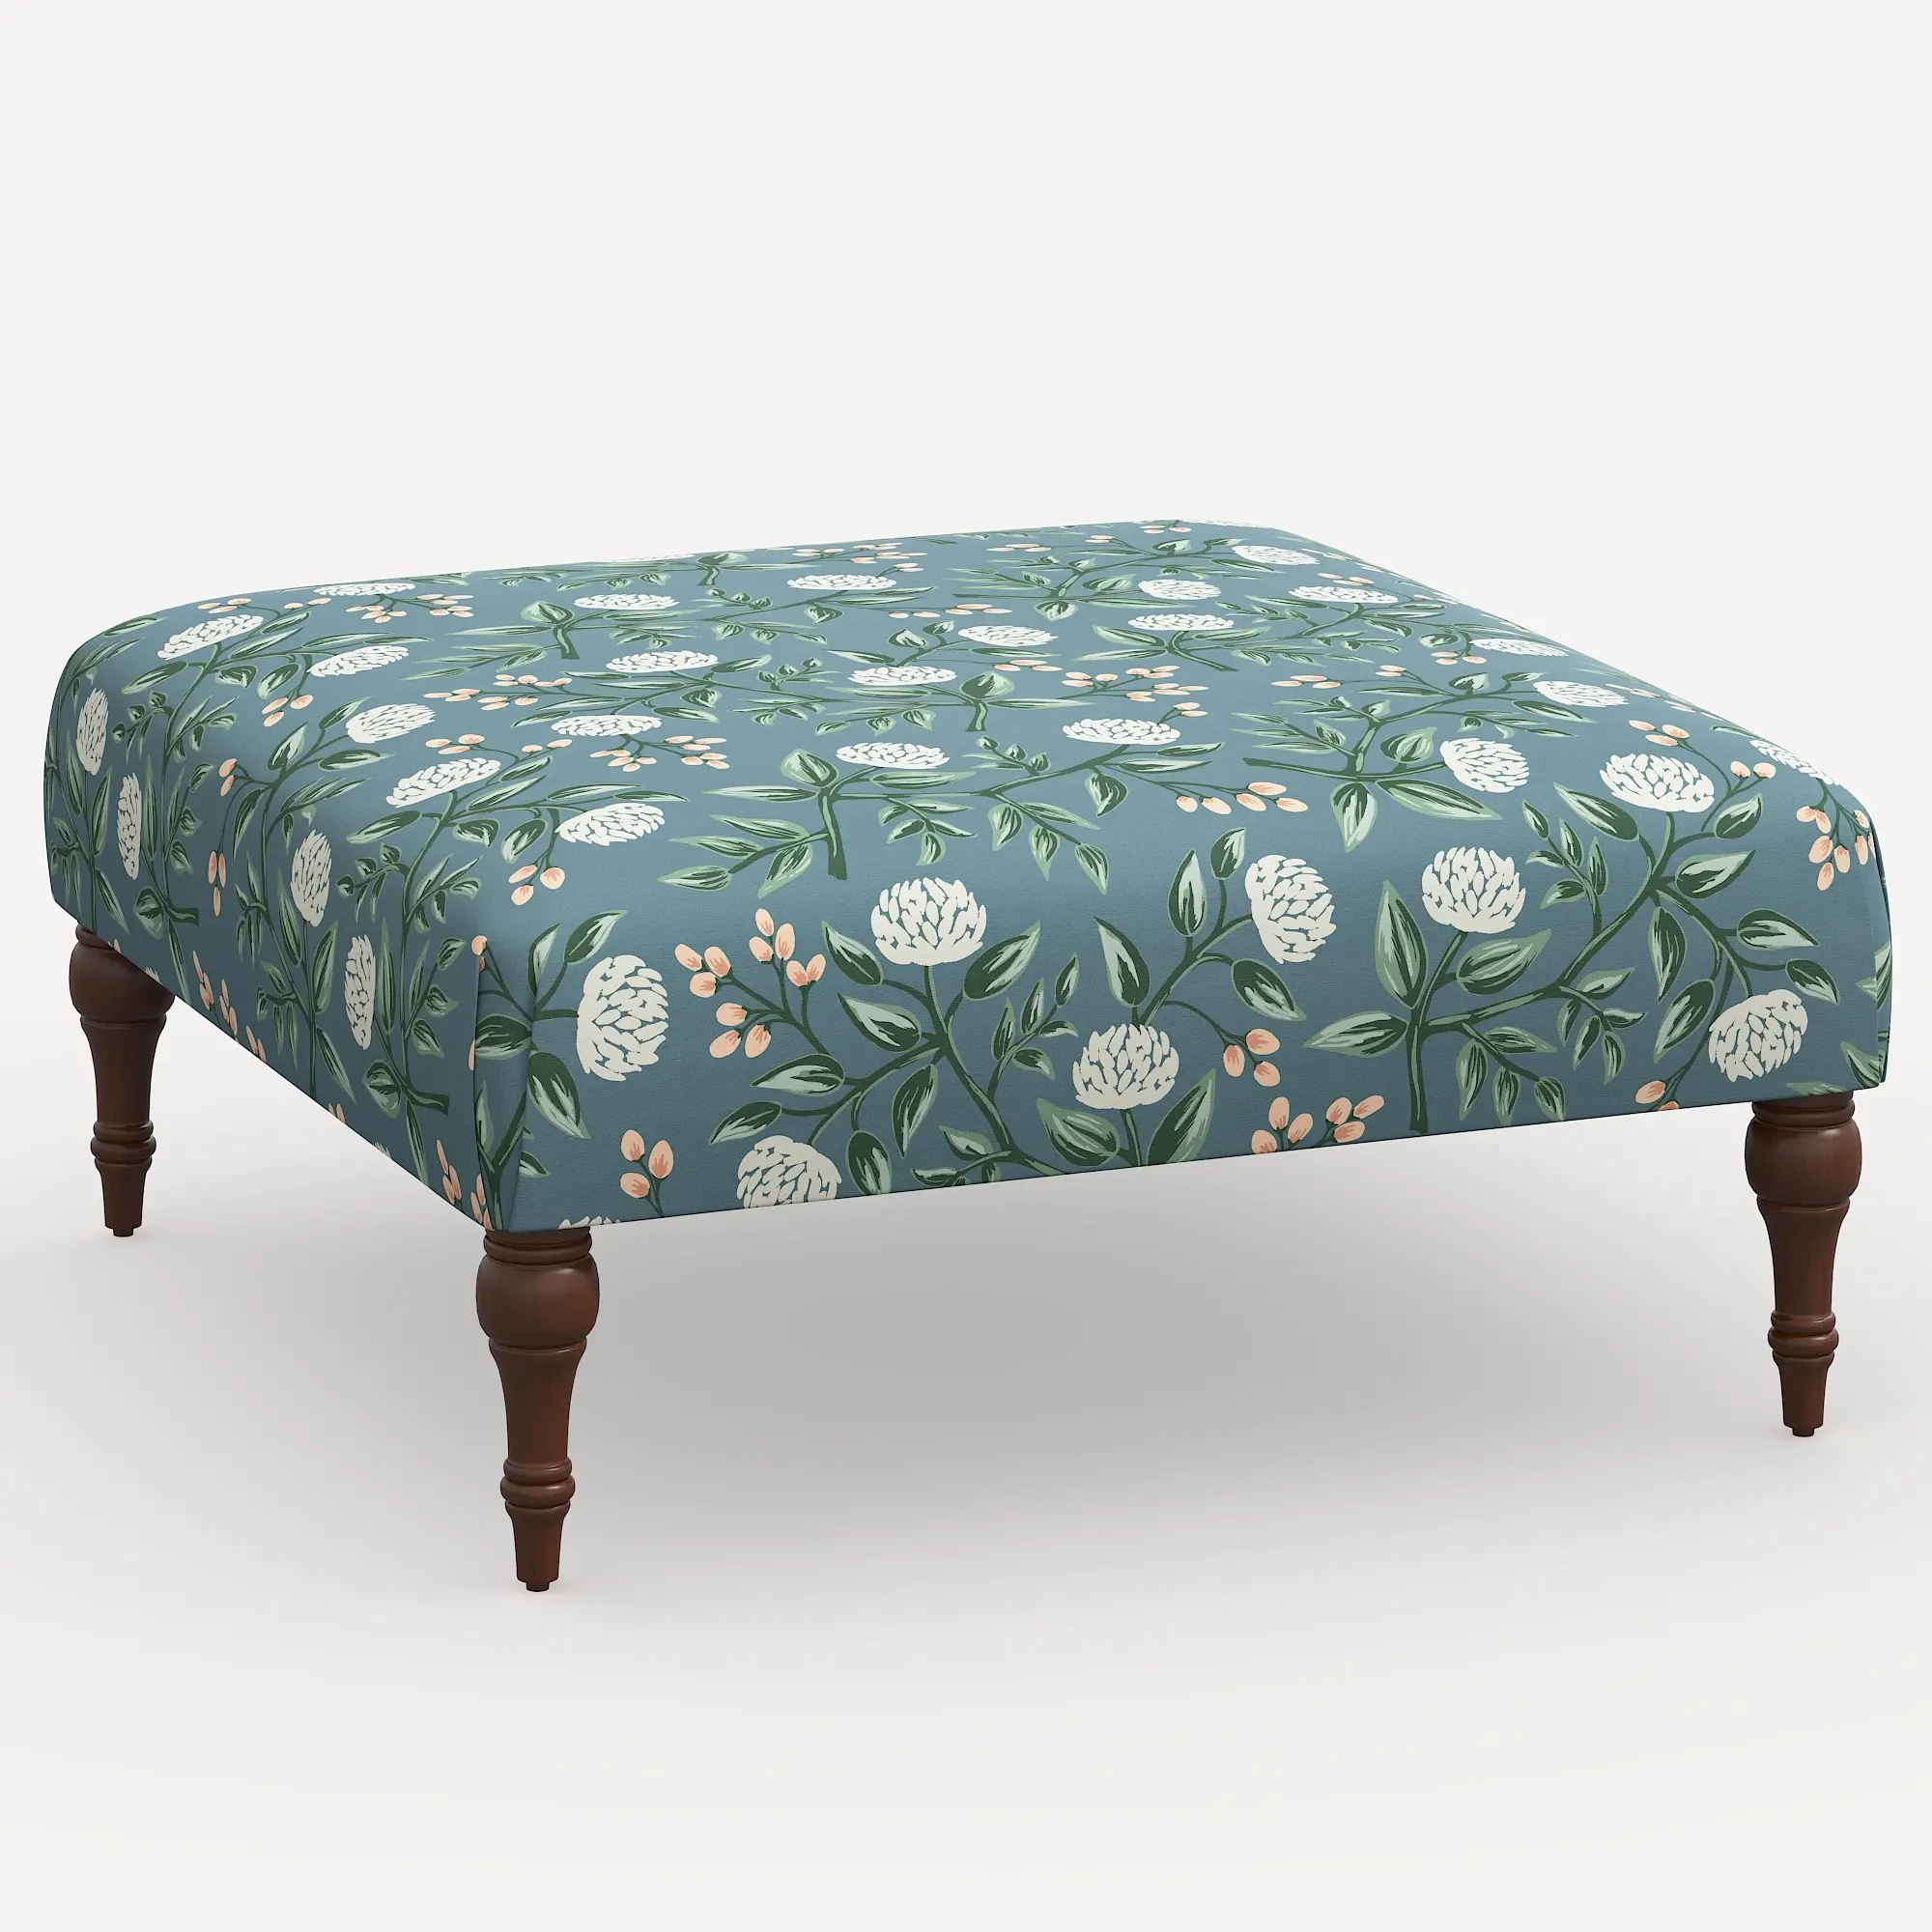 Rifle Paper Co. Greenwich Emerald Peonies Ottoman with Espresso Legs